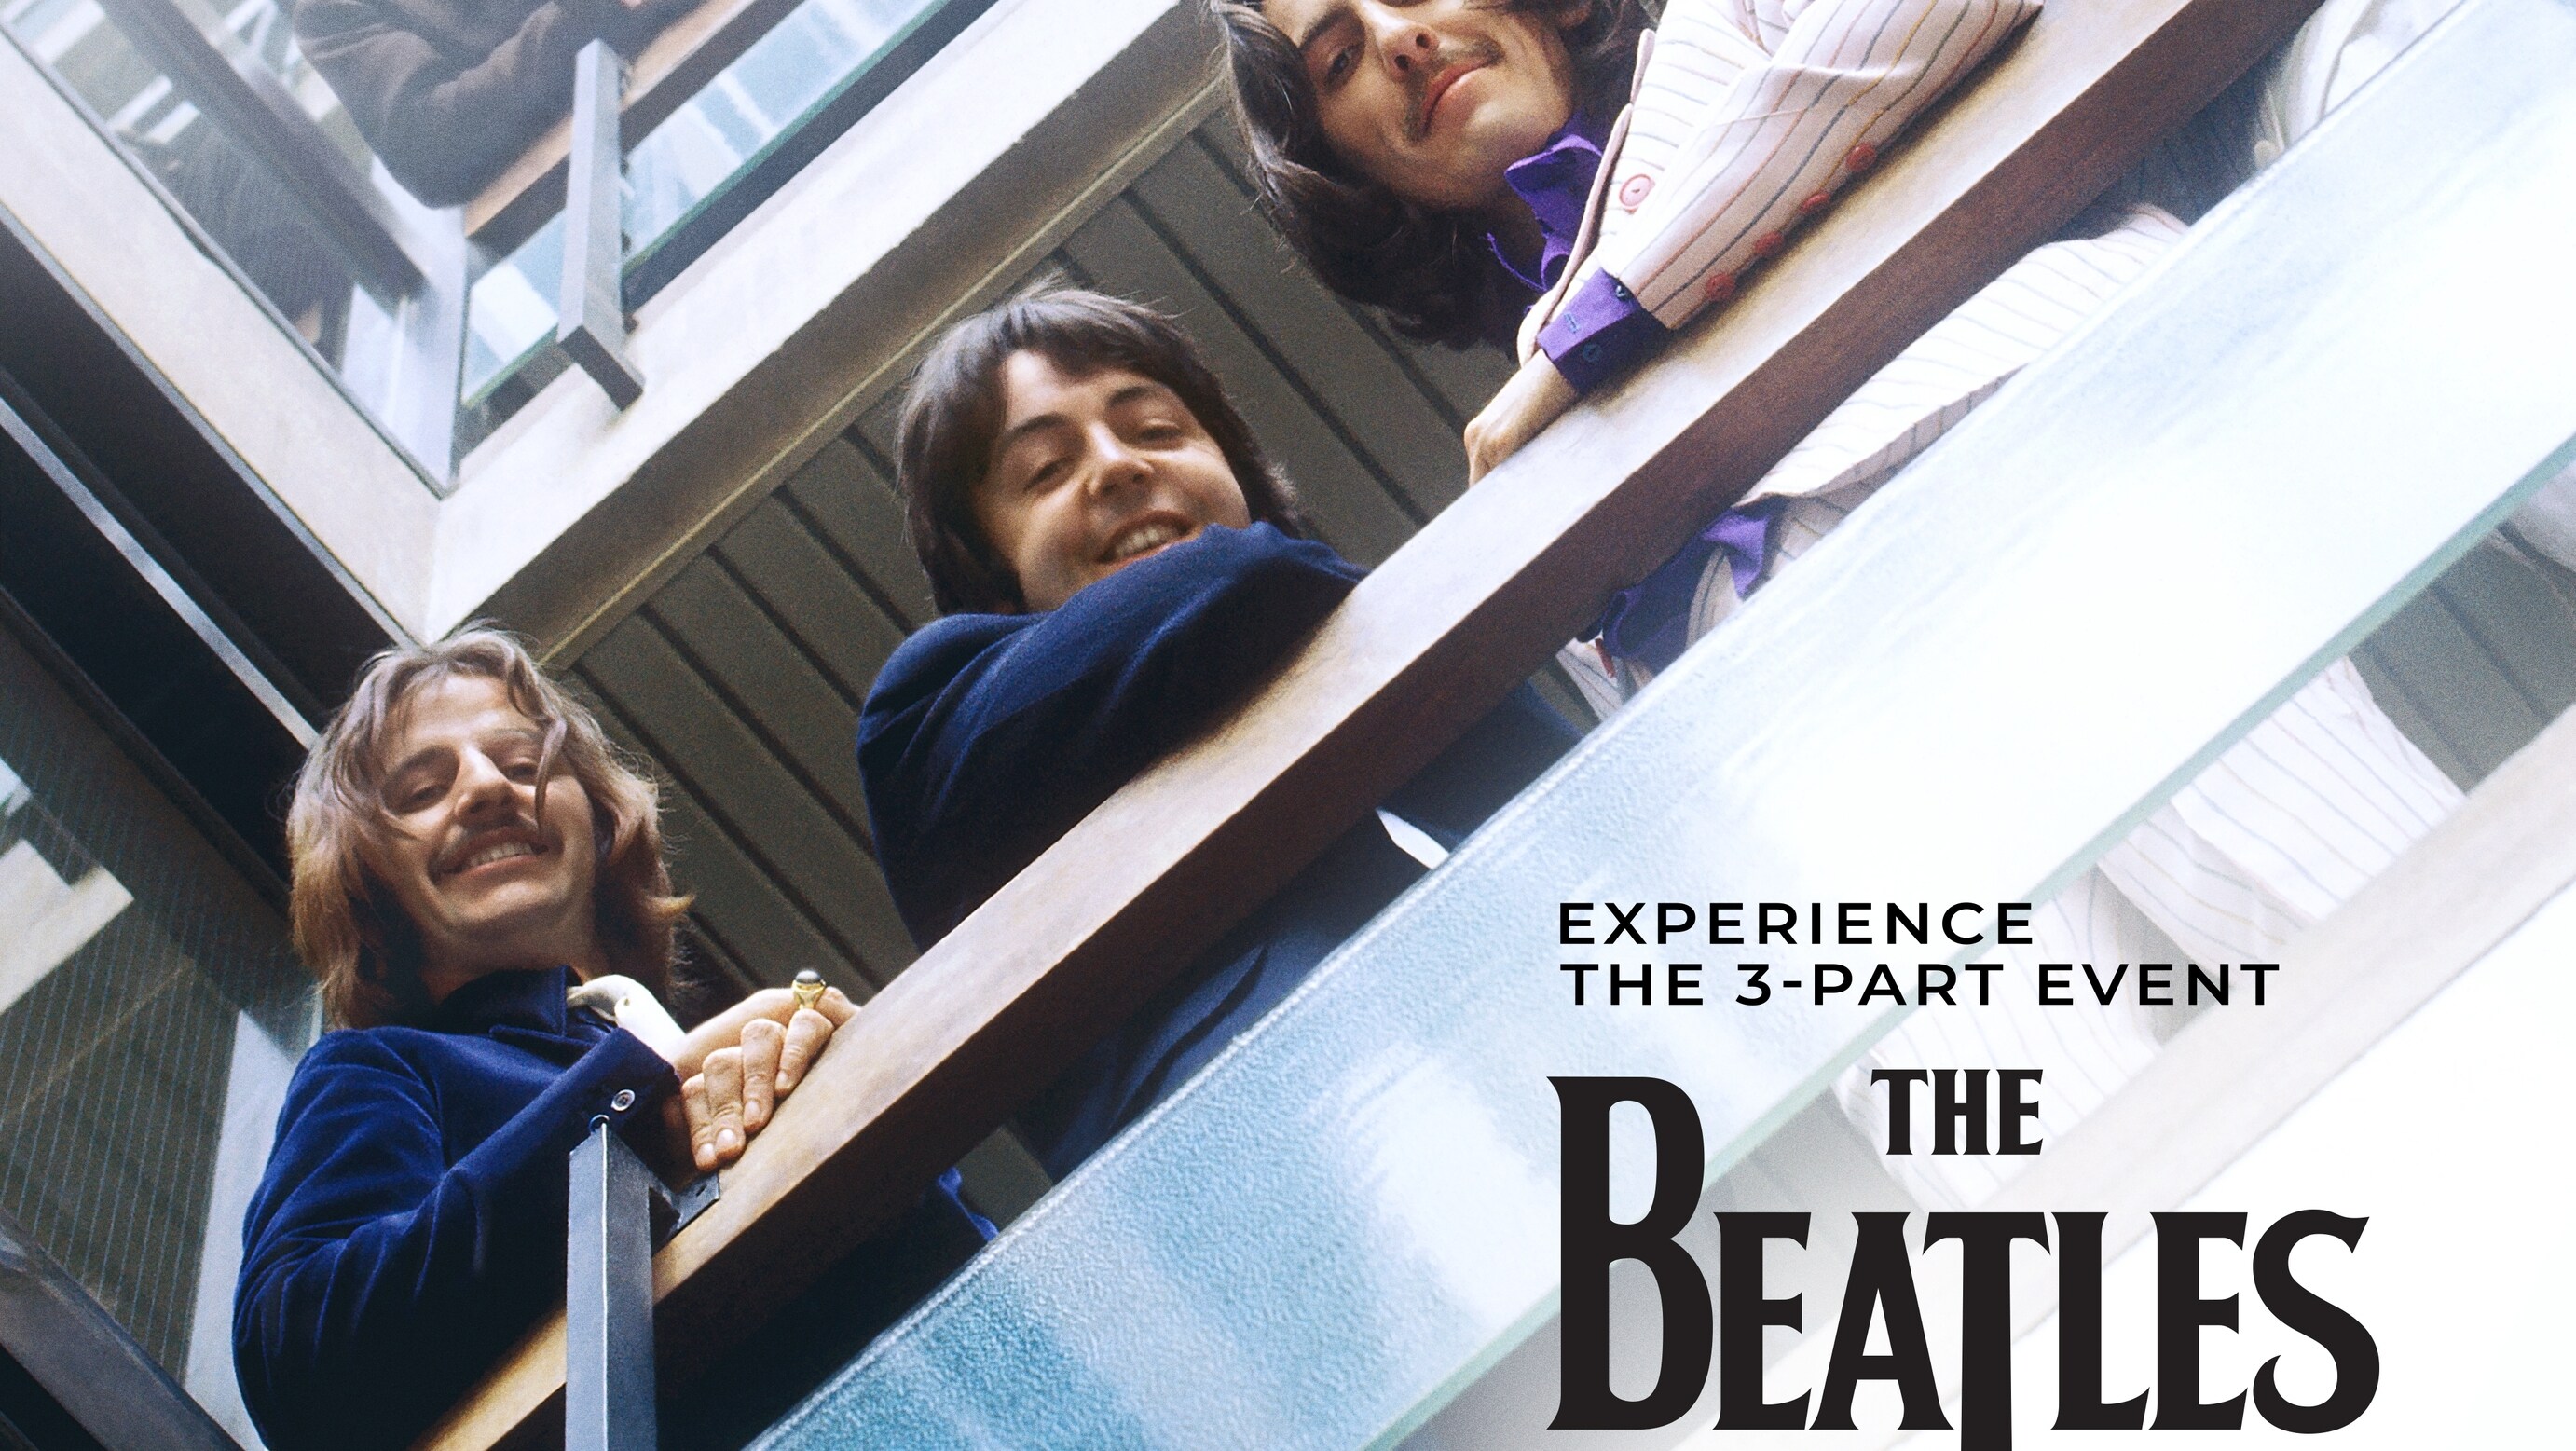 DISNEY+ DEBUTS TRAILER AND KEY ART FOR “THE BEATLES: GET BACK,” AN ORIGINAL DOCUSERIES DIRECTED BY PETER JACKSON